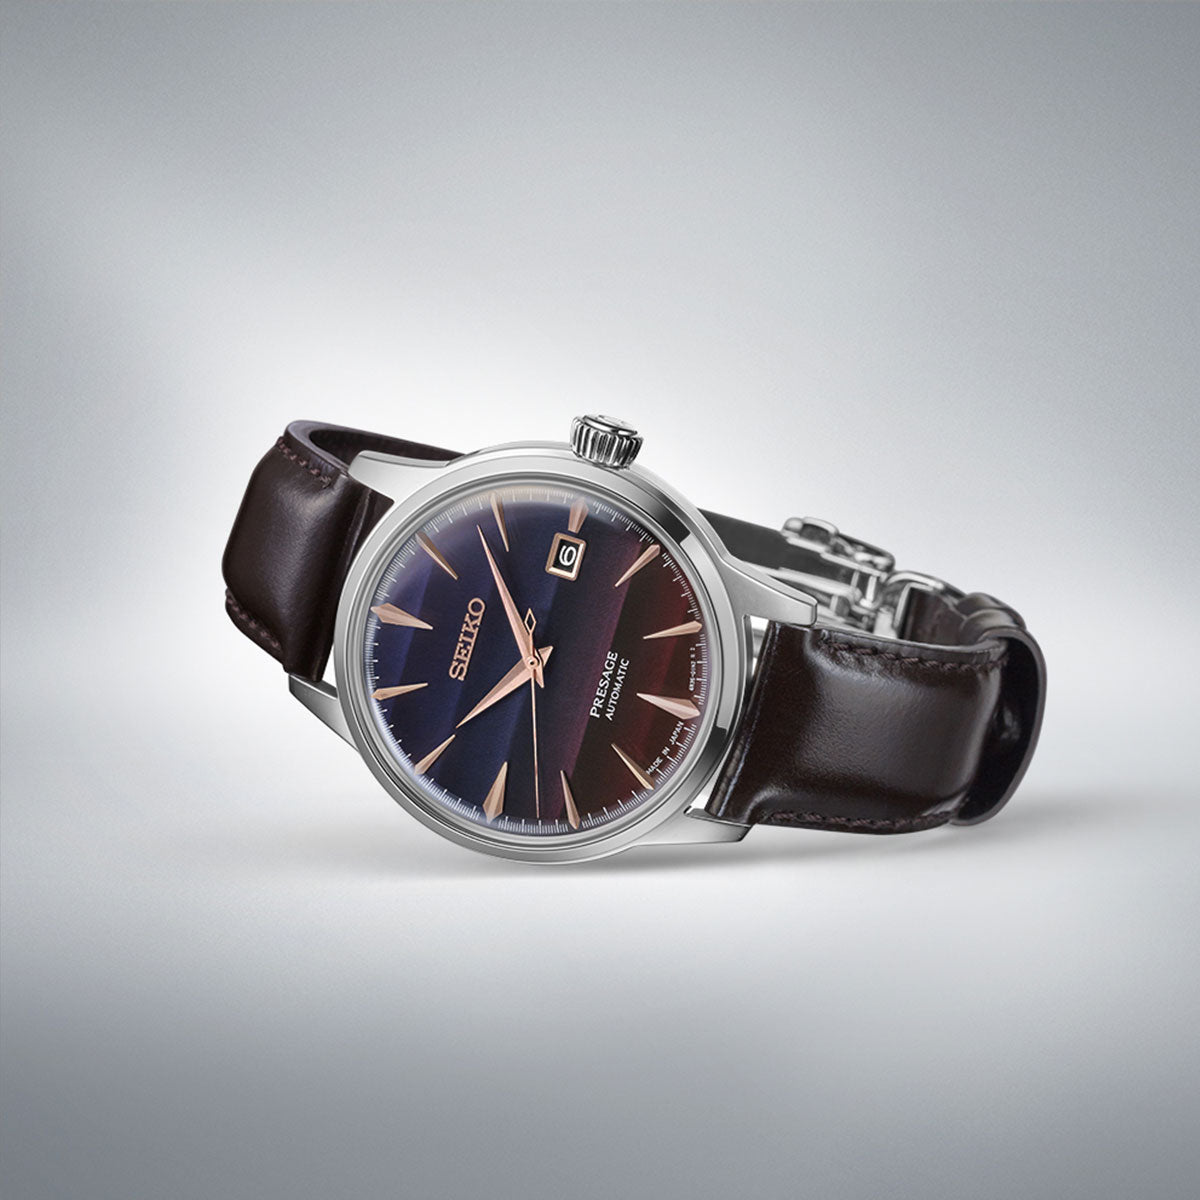 Seiko Presage Cocktail Time Star Bar Limited Edition Purple Sunset Watch $865